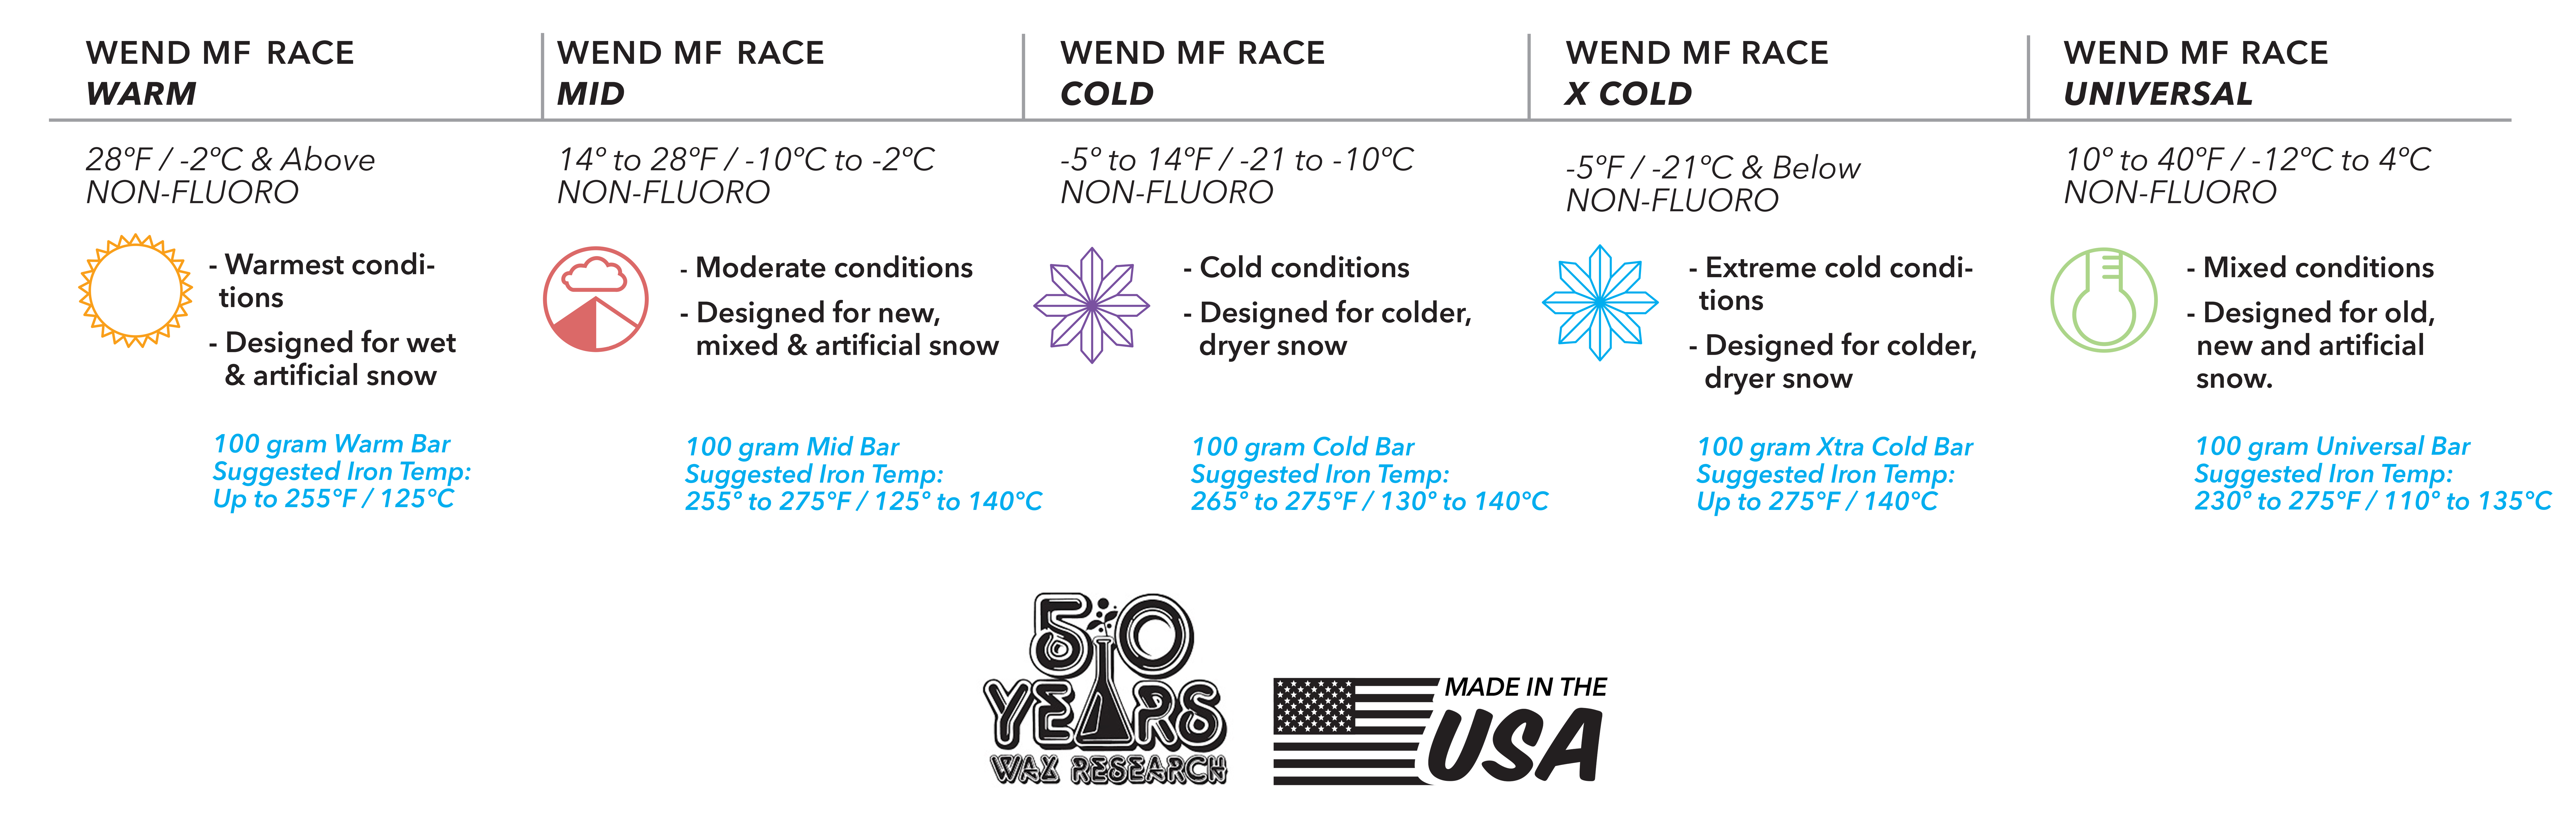 WEND MF Race  WARM 28ºF / -2ºC & Above NON-FLUORO. - Warmest conditions - Designed for wet   & artificial snow. Warm Bar Suggested Iron Temp:  Up to 255°F / 125°C. WEND MF Race  MID 14º to 28ºF / -10ºC to -2ºC NON-FLUORO. - Moderate conditions - Designed for new,   mixed & artificial snow. Mid Bar Suggested Iron Temp:  255º to 275°F / 125º to 140°C. WEND MF Race COLD -5º to 14ºF / -21 to -10ºC  NON-FLUORO. - Cold conditions - Designed for colder,   dryer snow. Cold Bar Suggested Iron Temp:  265º to 275°F / 130º to 140°C. WEND MF Race  X COLD -5ºF / -21ºC & Below NON-FLUORO. - Extra cold conditions - Designed for colder dryer snow. Cold Bar  Suggested Iron Temp:  Up to 275°F / 140°C. WEND MF Race  UNIVERSAL 10º to 40ºF / -12ºC to 4ºC NON-FLUORO. - Mixed conditions - Designed for old, new and artificial snow. Universal Bar  Suggested Iron Temp:  230º to 275°F / 110º to 135ºC.